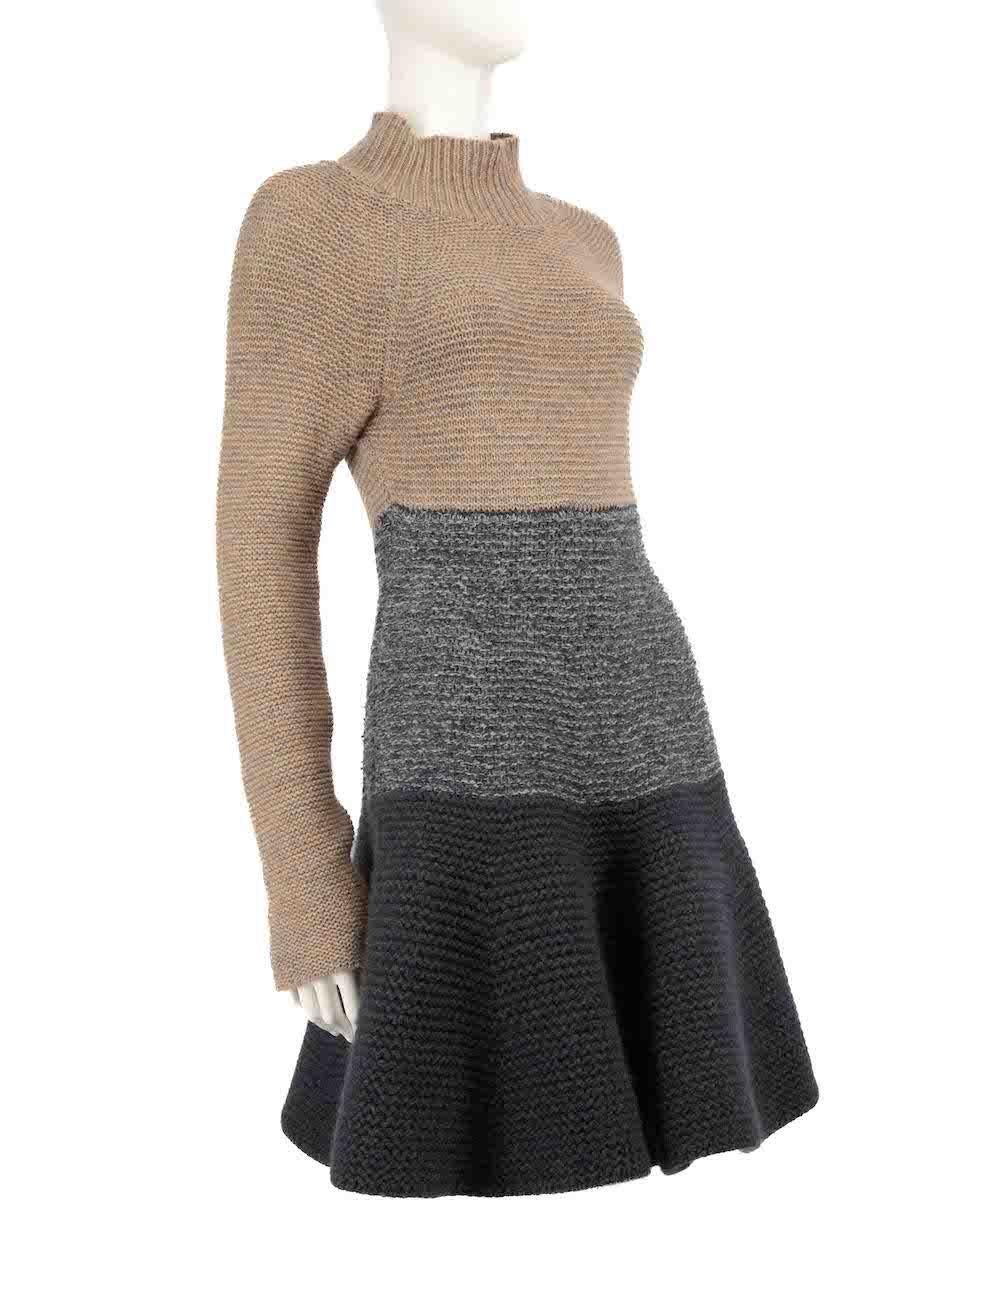 CONDITION is Very good. Hardly any visible wear to the dress is evident on this used Stella McCartney designer resale item.
 
 
 
 Details
 
 
 Multicolour- beige, navy
 
 Wool
 
 Knit dress
 
 Knee length
 
 Long sleeves
 
 Turtleneck
 
 Striped